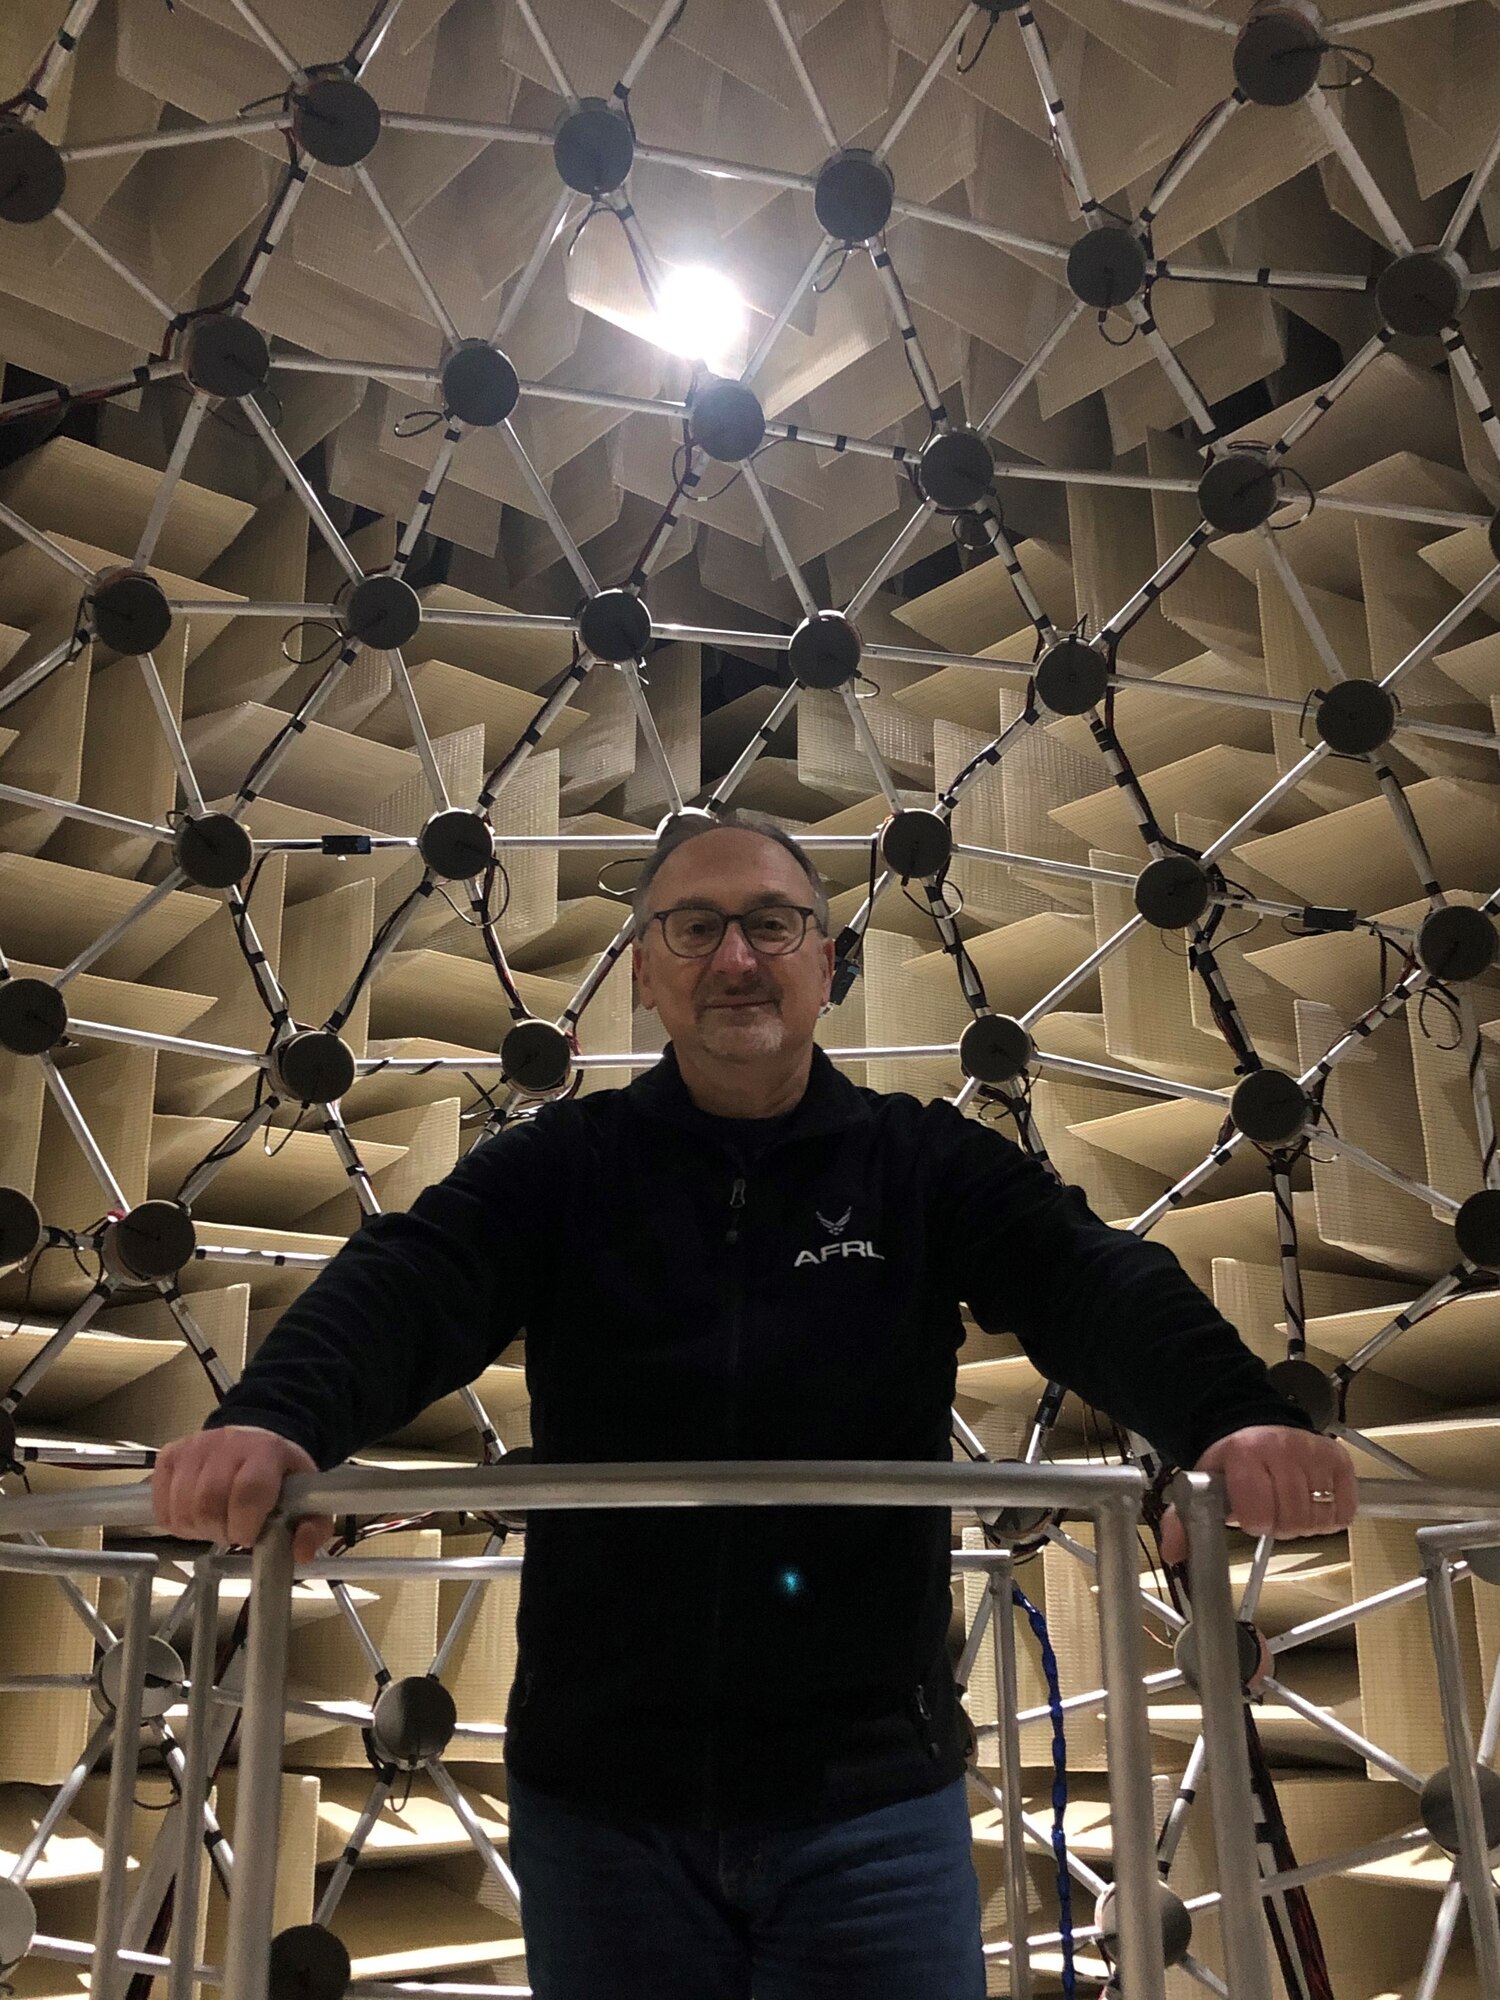 Dr. Brian Simpson, of the 711th Human Performance Wing’s Sensory Systems Branch, stands inside AFRL’s Auditory Localization Facility, an anechoic chamber that contains a 14-foot spherical array of 277 loudspeakers. The facility was designed for studying human auditory perception in complex acoustic environments. (Courtesy photo)